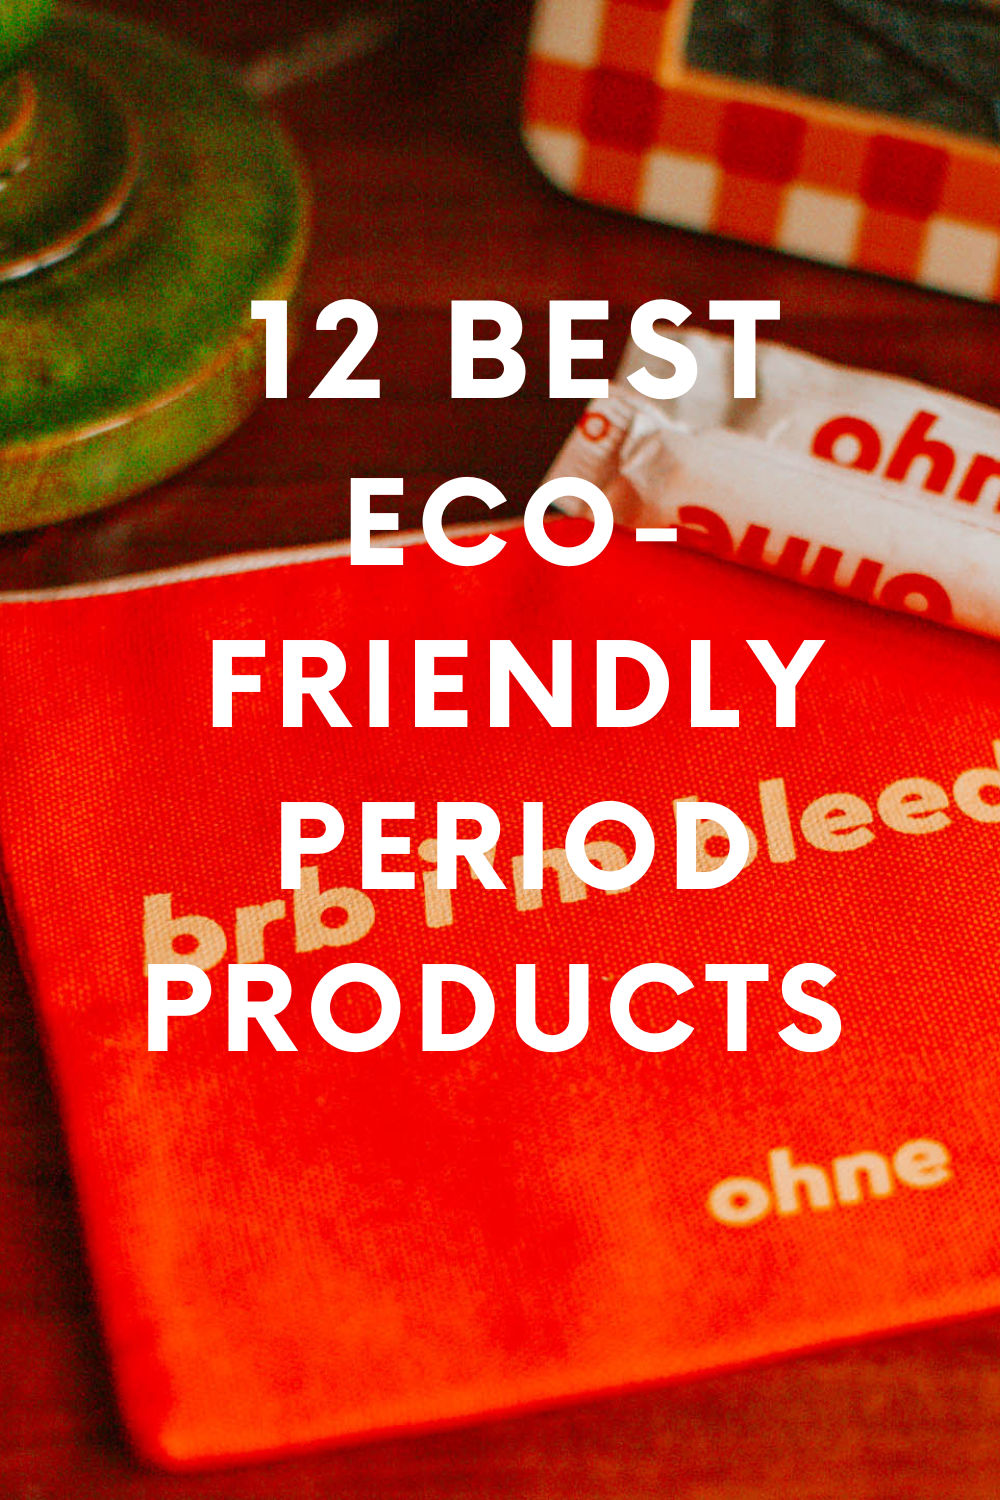 12 best eco-friendly period products